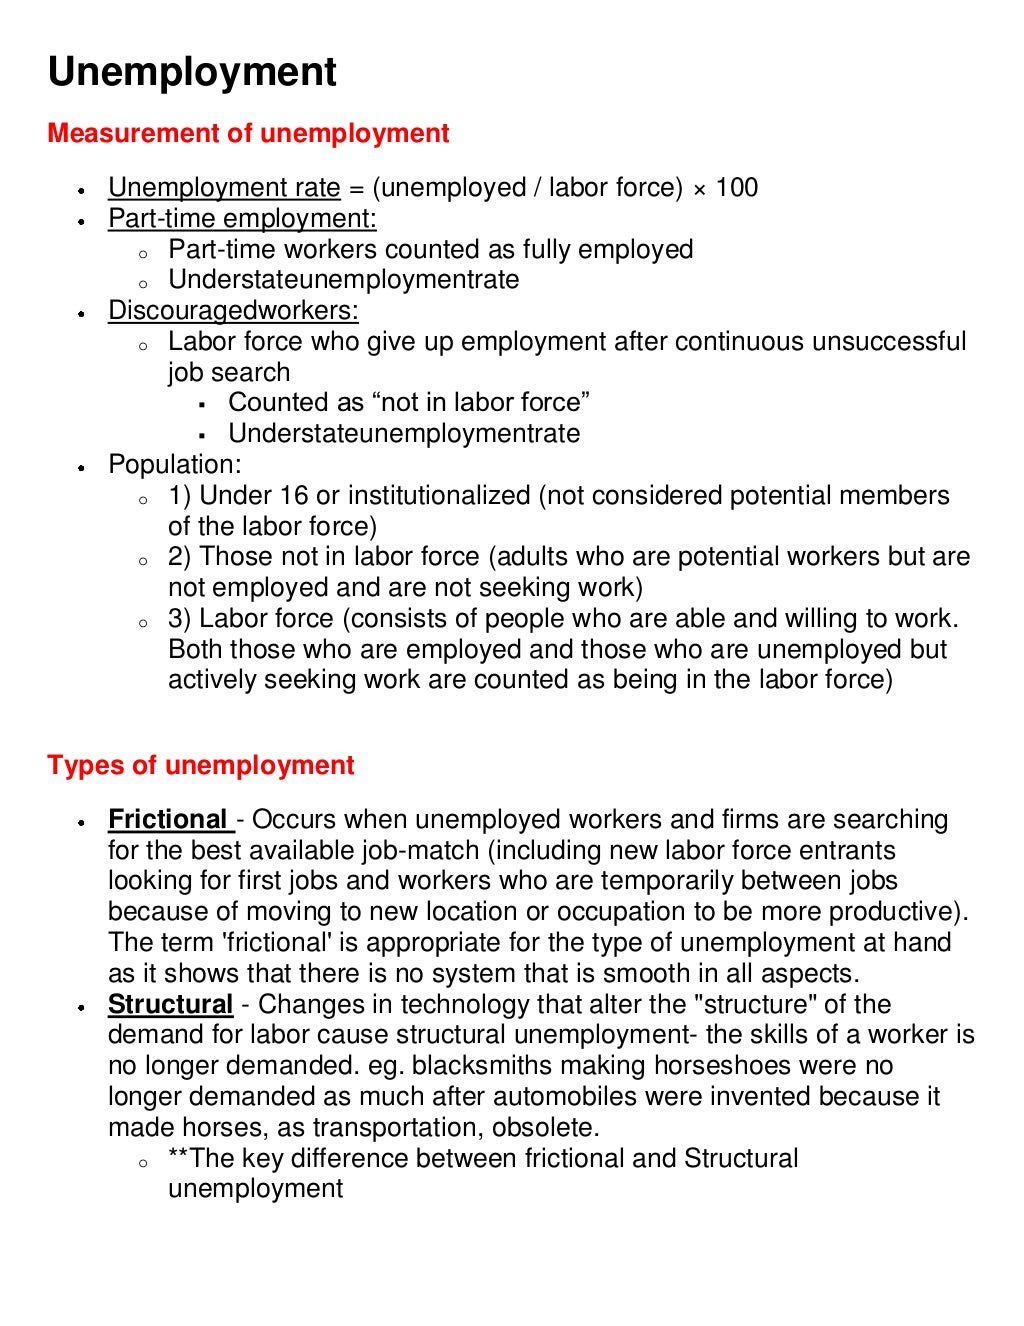 thesis on unemployment pdf